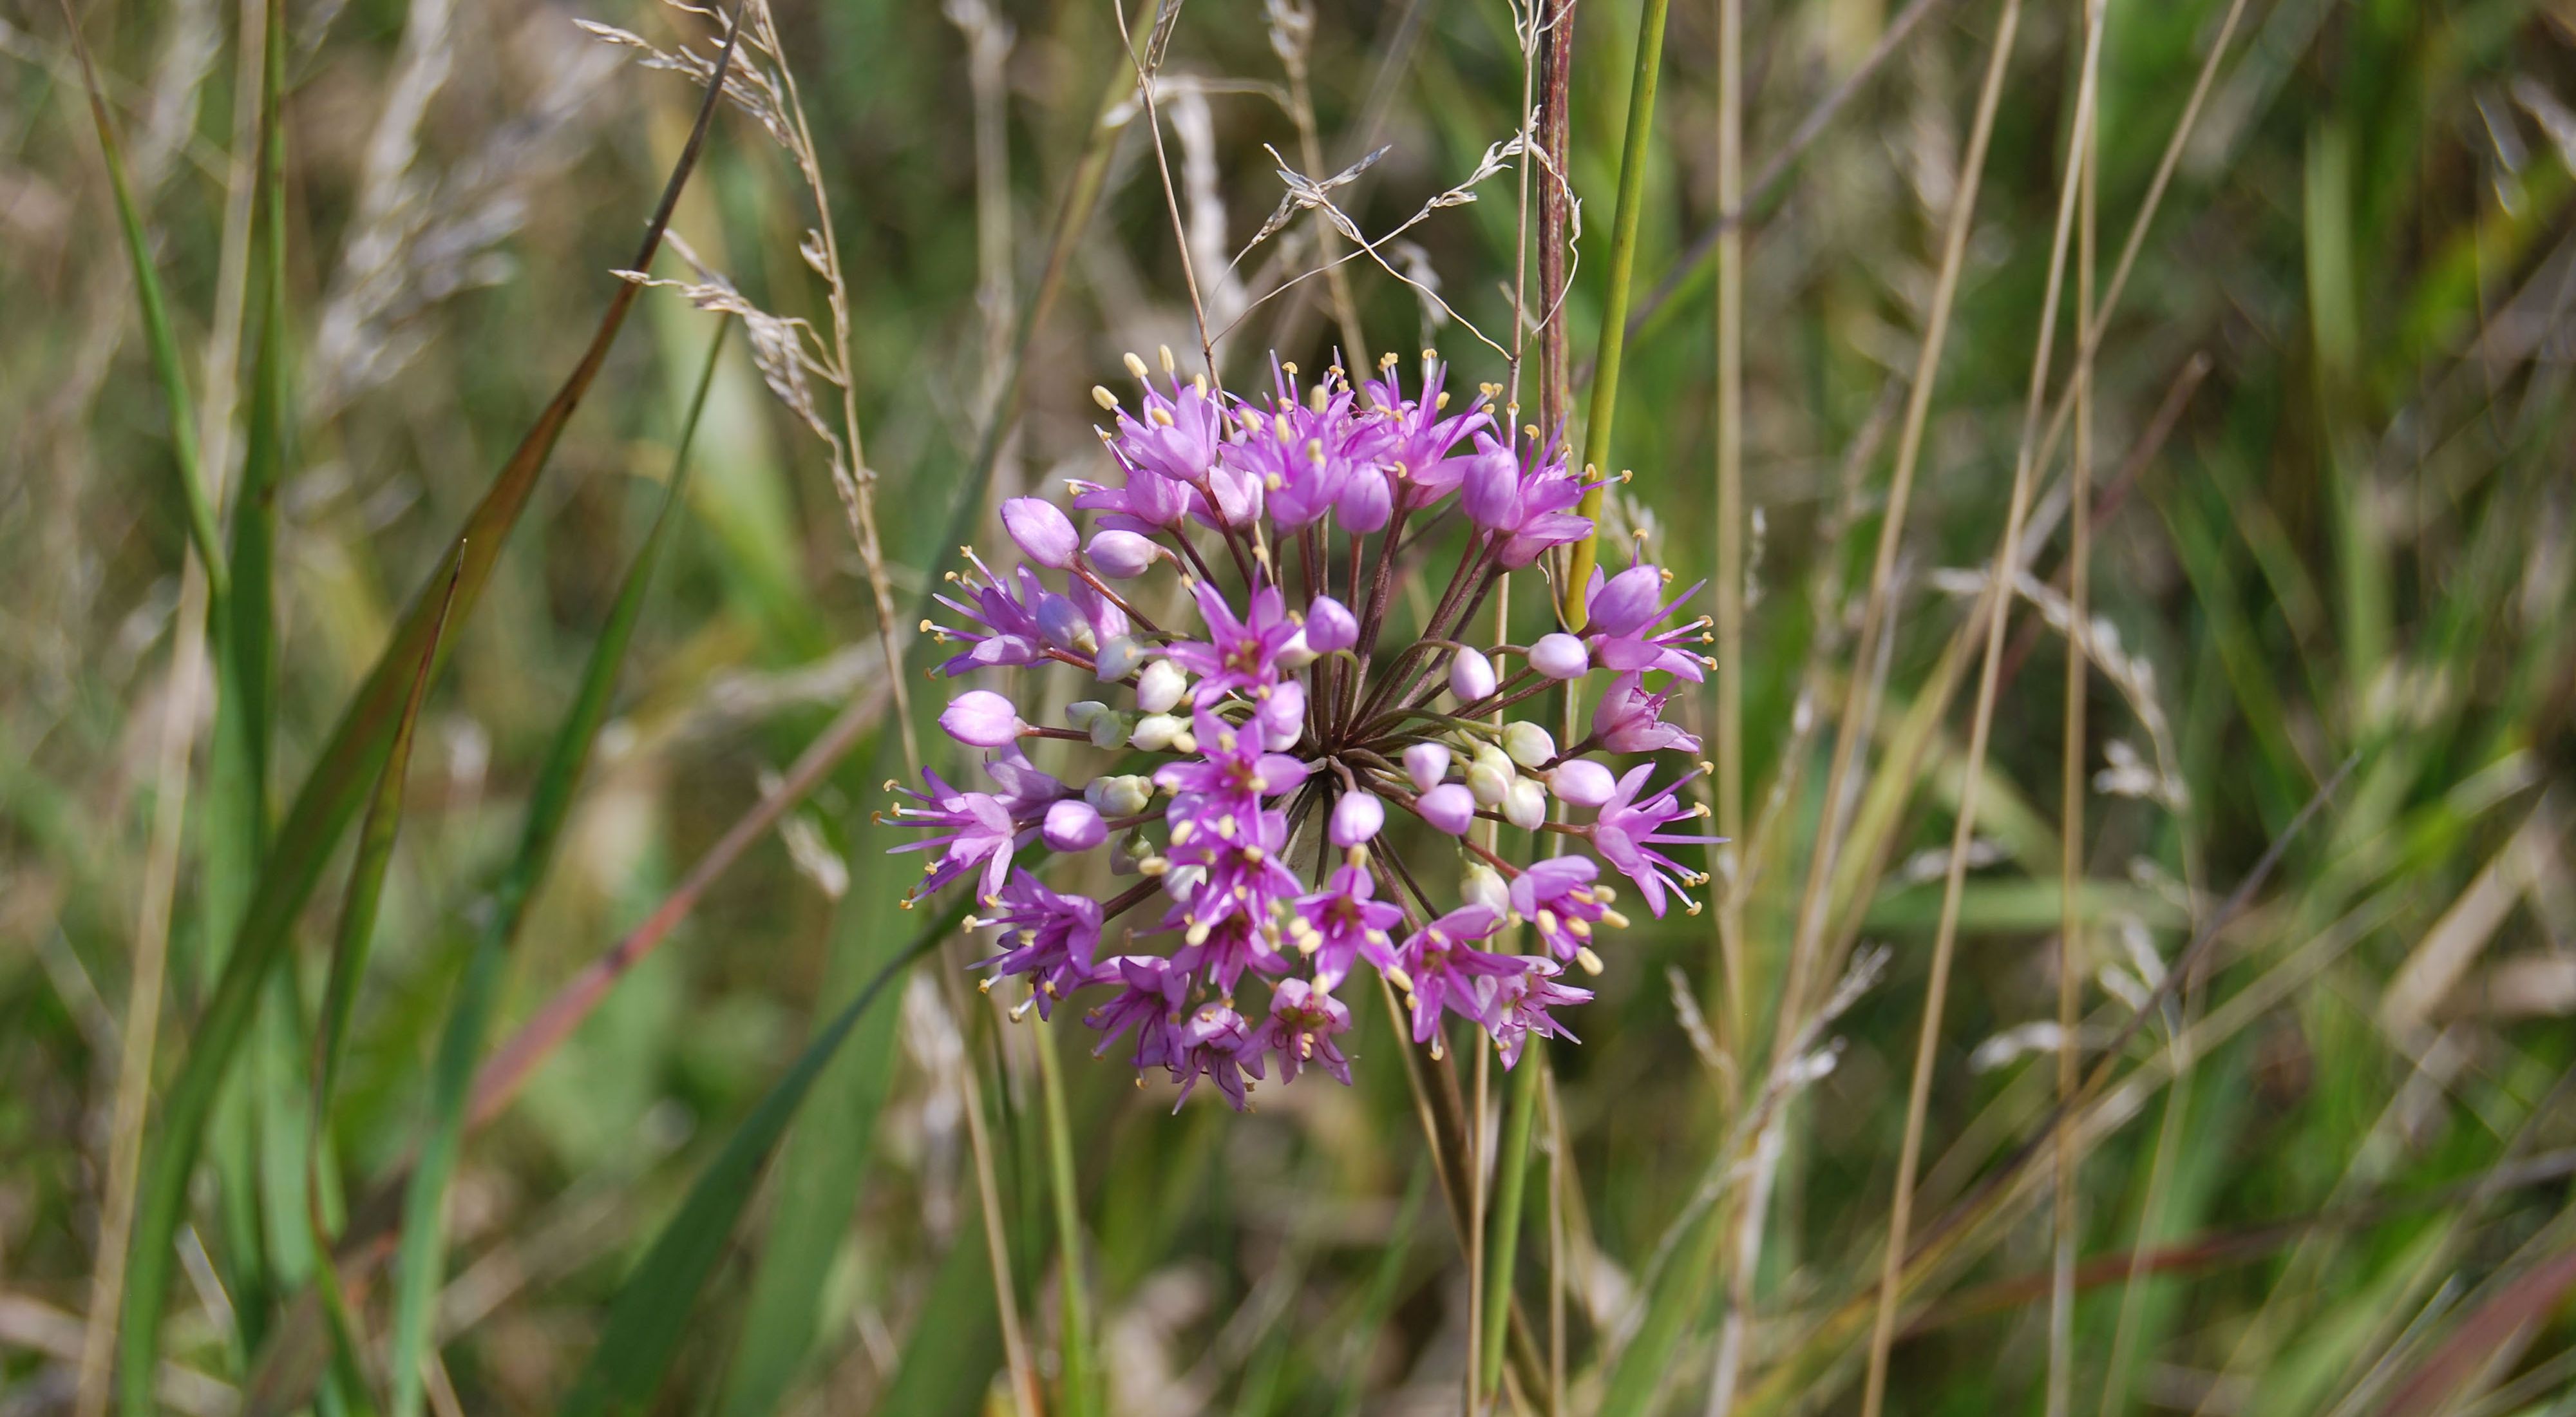 Close-up of a prairie onion flower surrounded by prairie grasses.